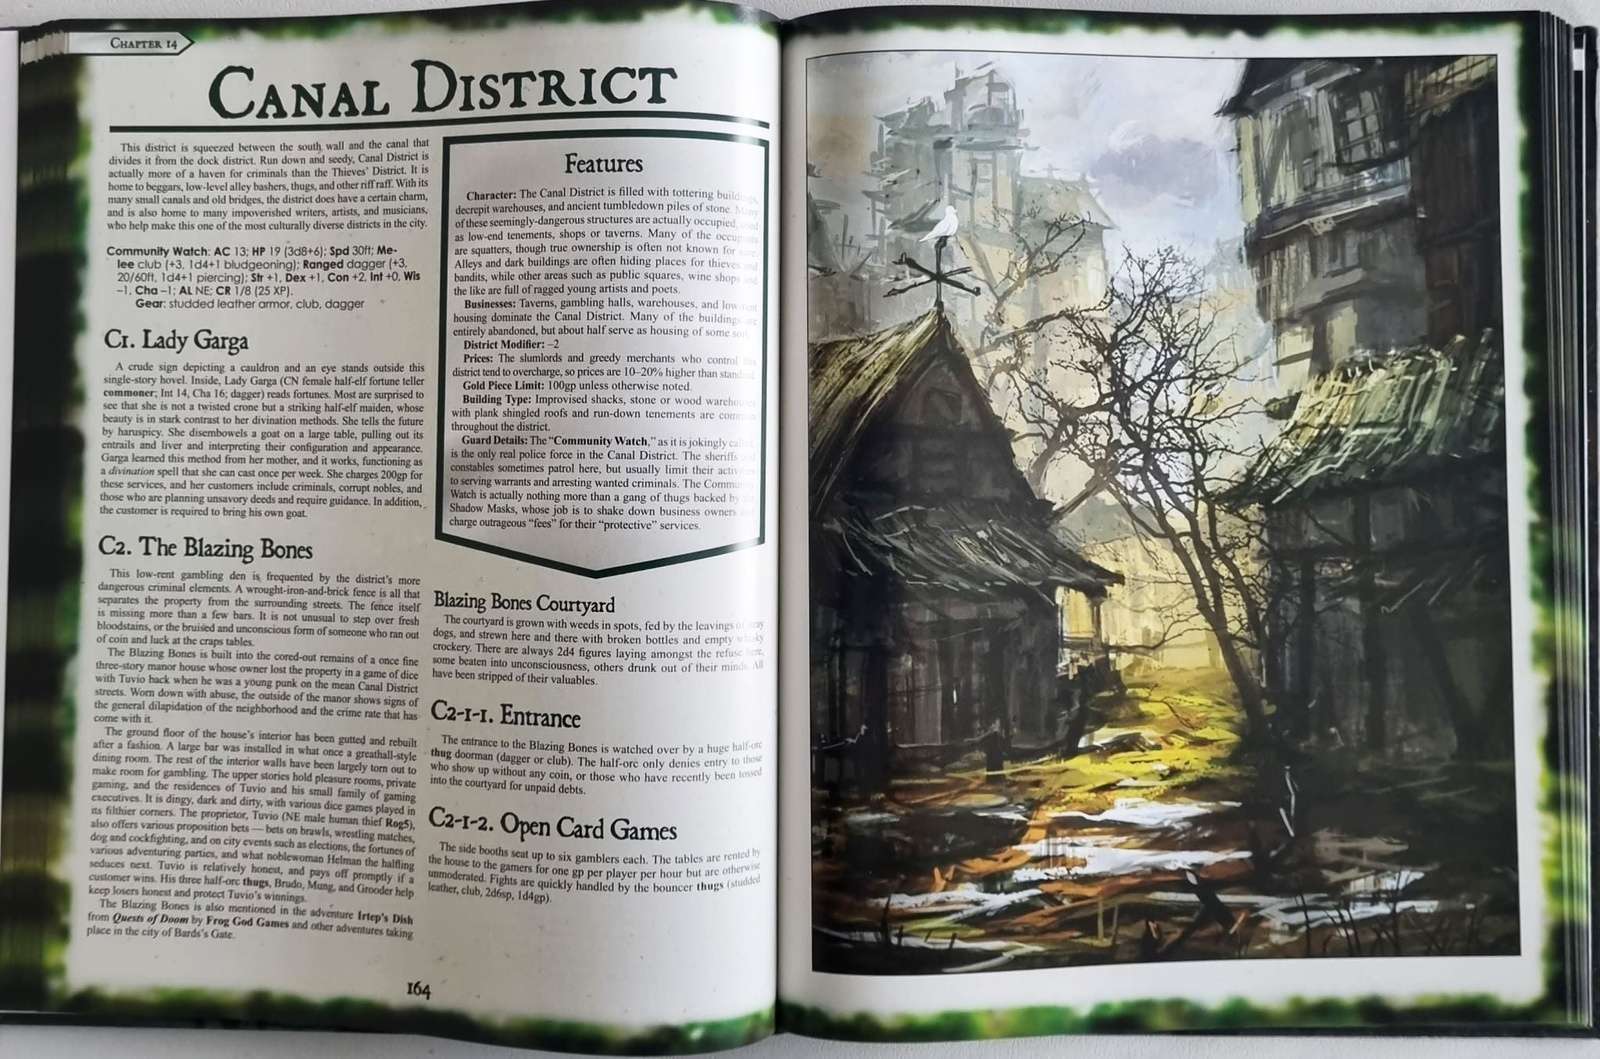 The Lost Lands: Bard's Gate - D&D 5th Edition 5e Frog God Games